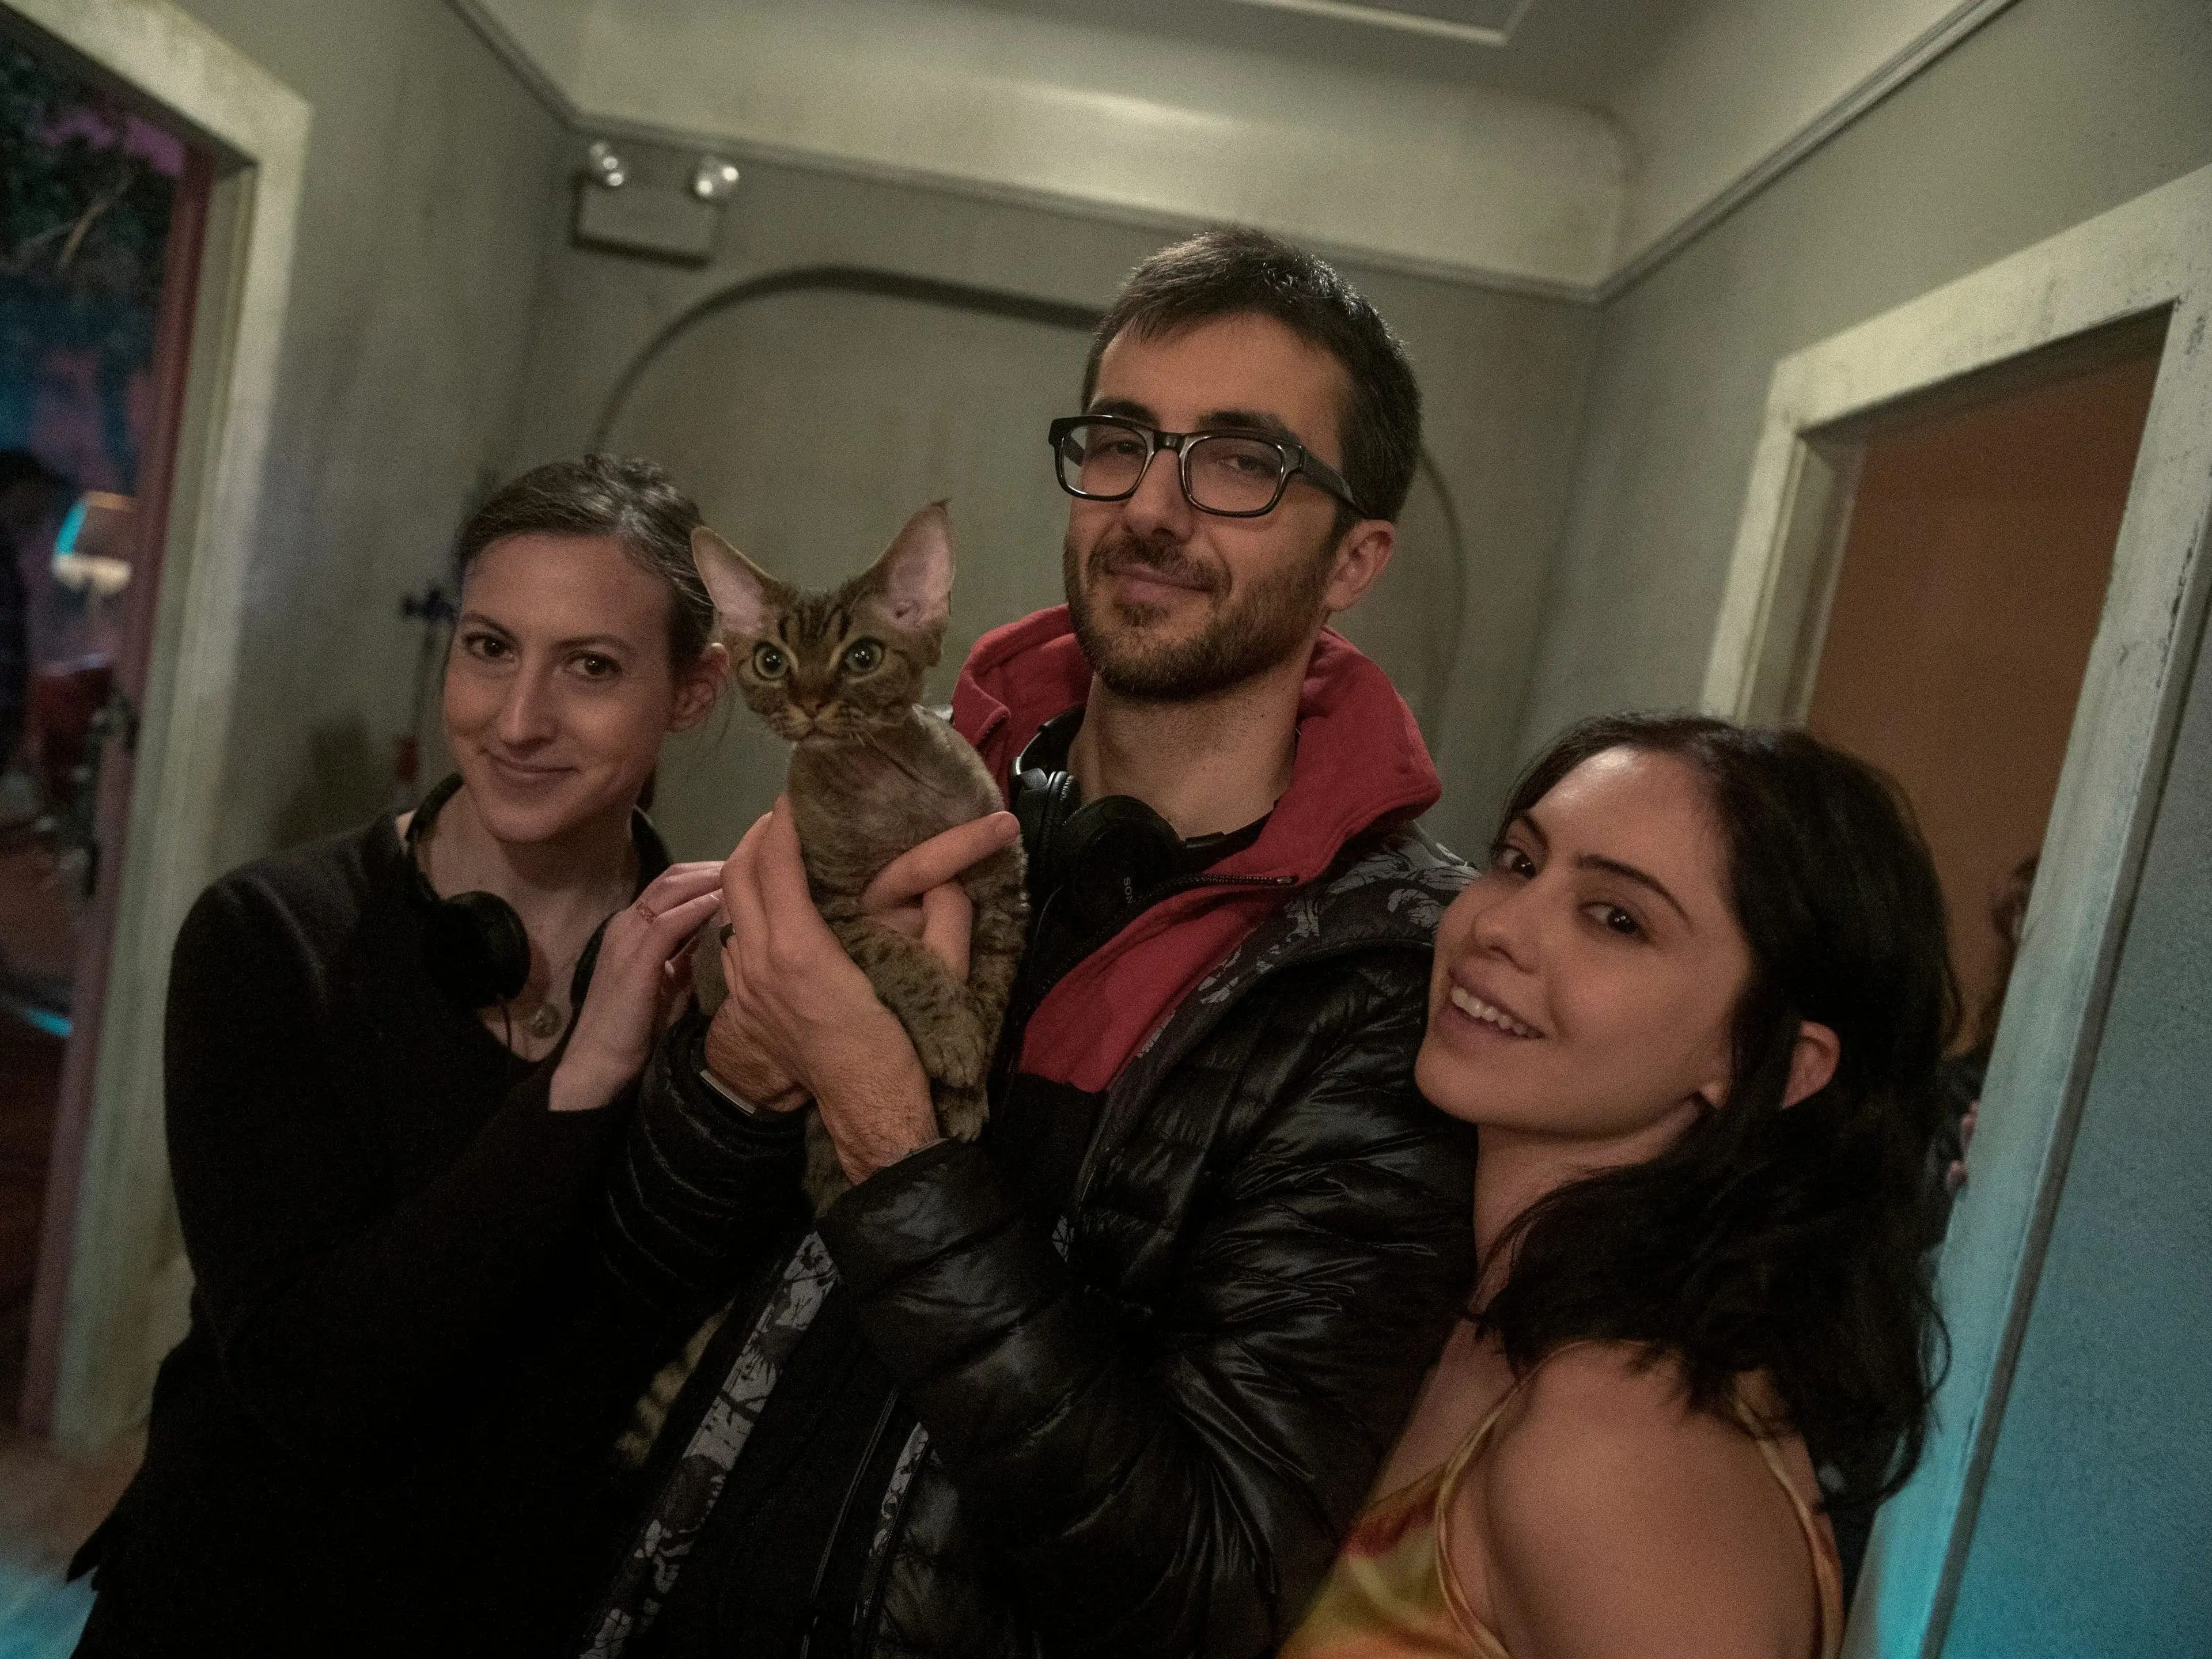 Lenore Zion, Nick Antosca, Rosa Salazar, and a kitten behind the scenes on the set of "Brand New Cherry Flavor"